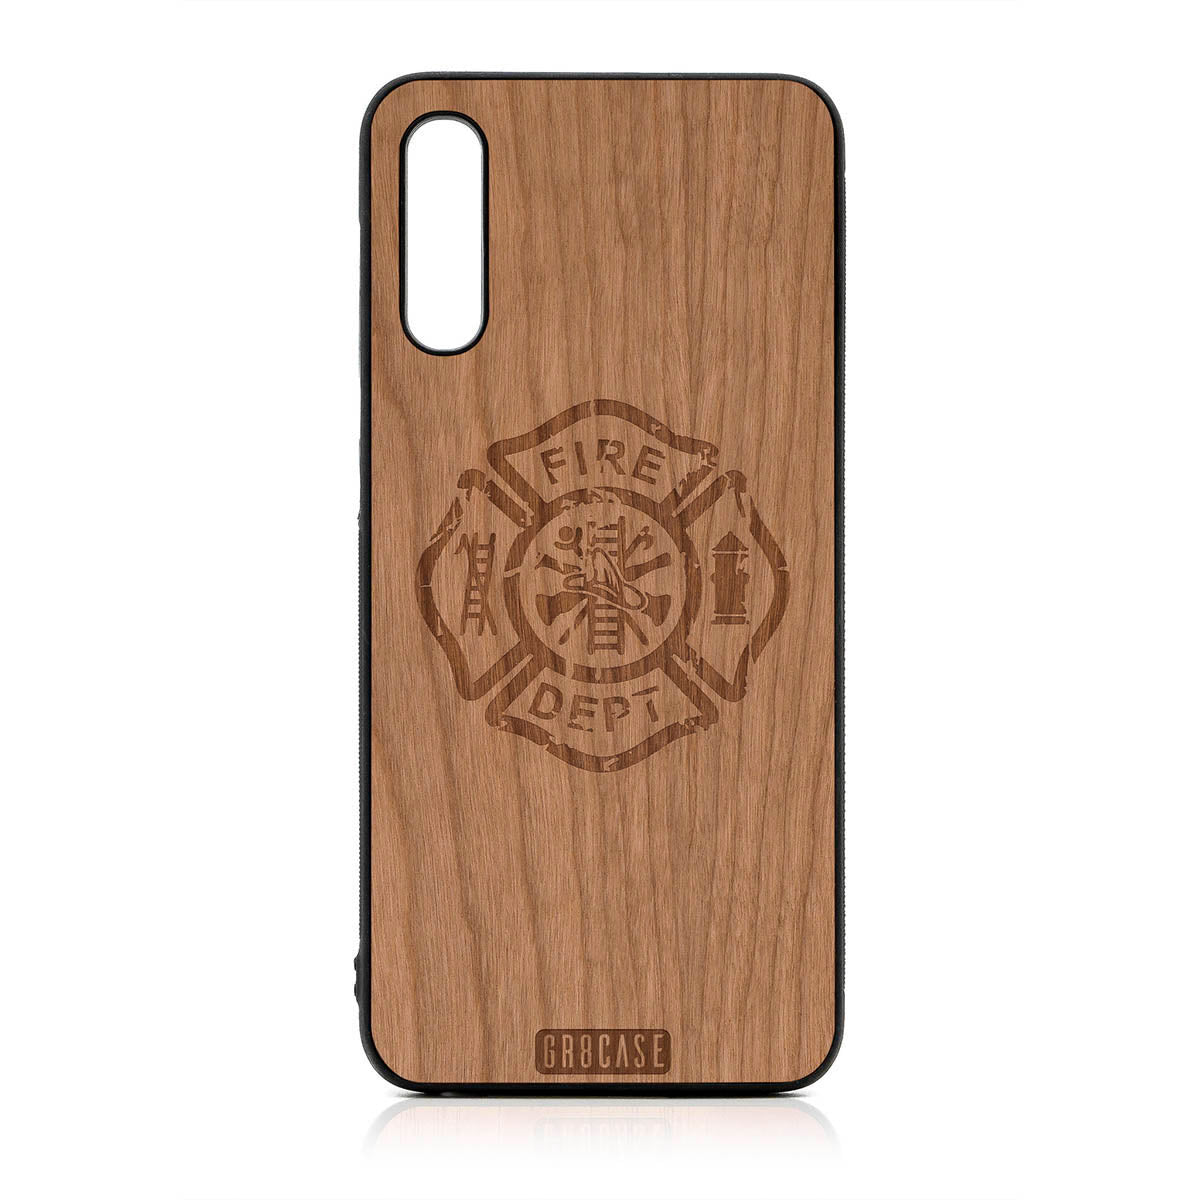 Fire Department Design Wood Case For Samsung Galaxy A50 by GR8CASE